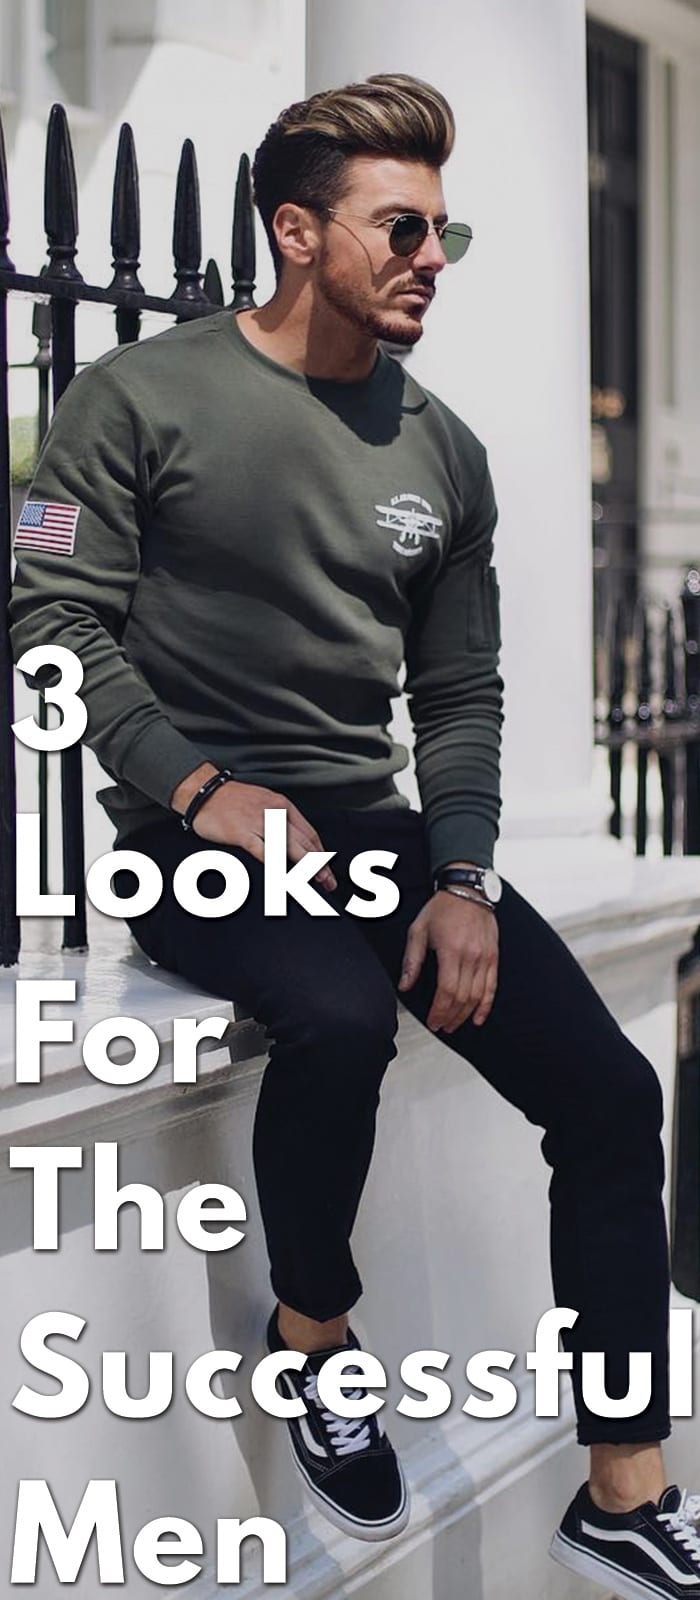 3 Looks For The Successful Men in 2018